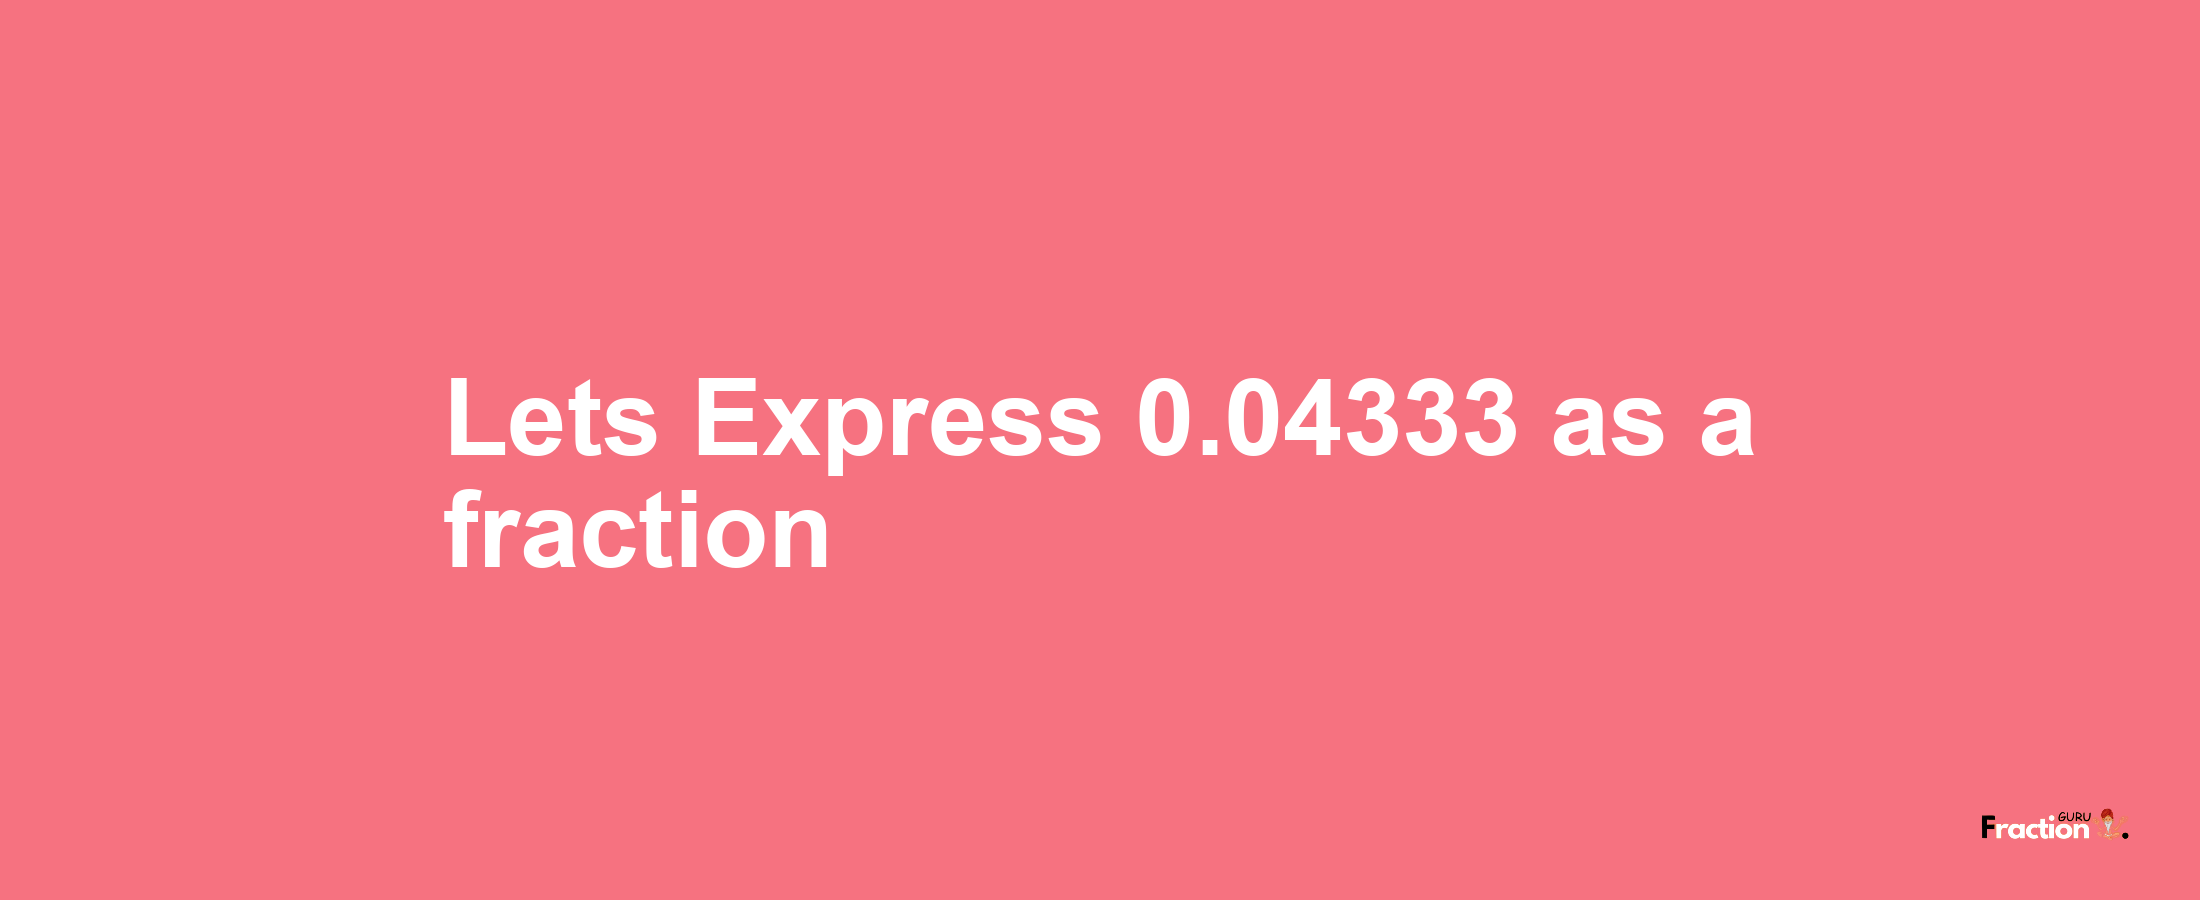 Lets Express 0.04333 as afraction